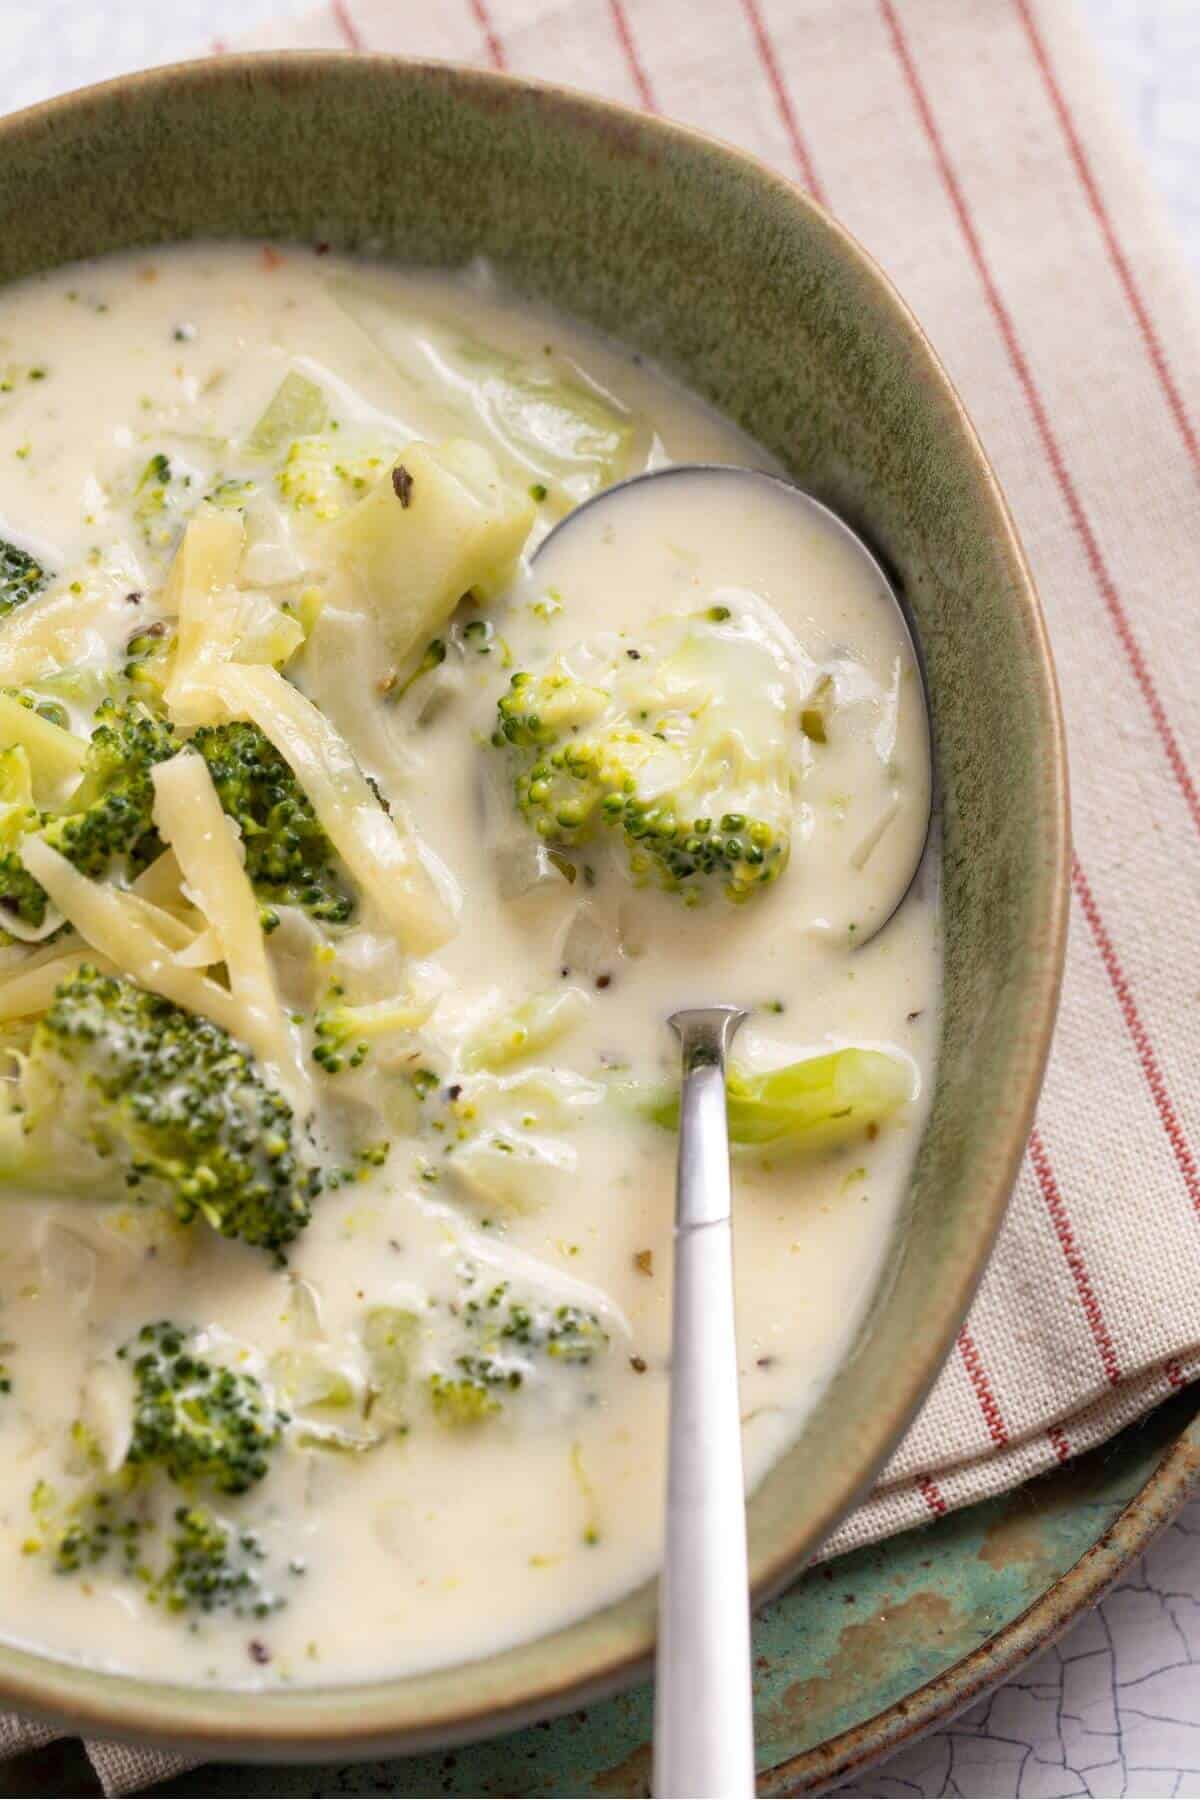 A bowl of broccoli and cheese soup with a spoon.